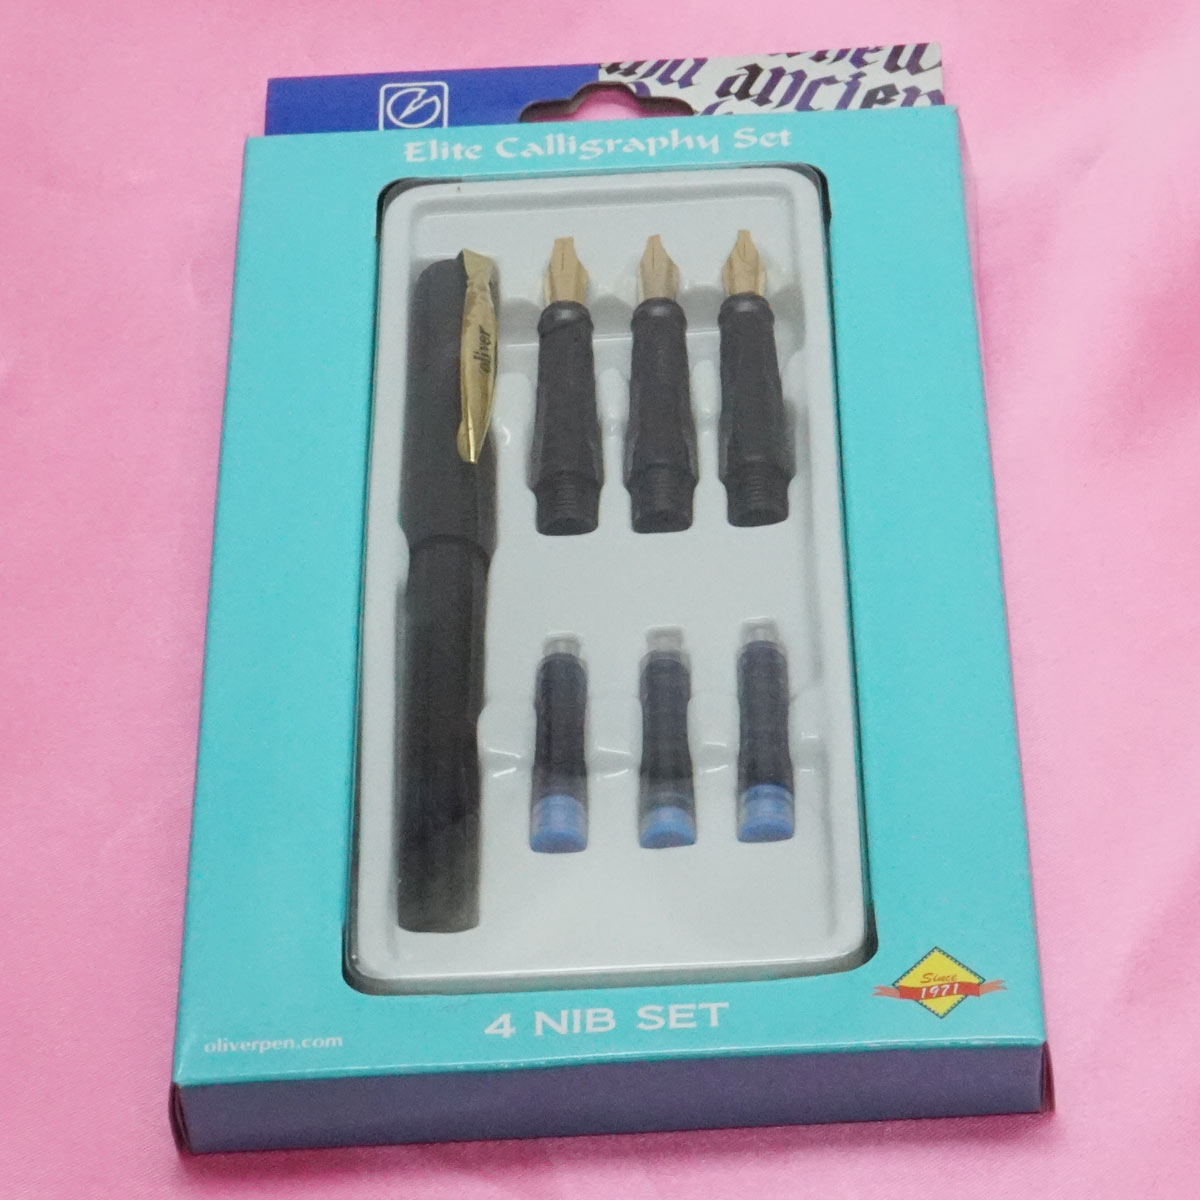 Oliver Elite Calligraphy Black Color Body With 4 Different Nibs Calligraphy Set SKU 21452